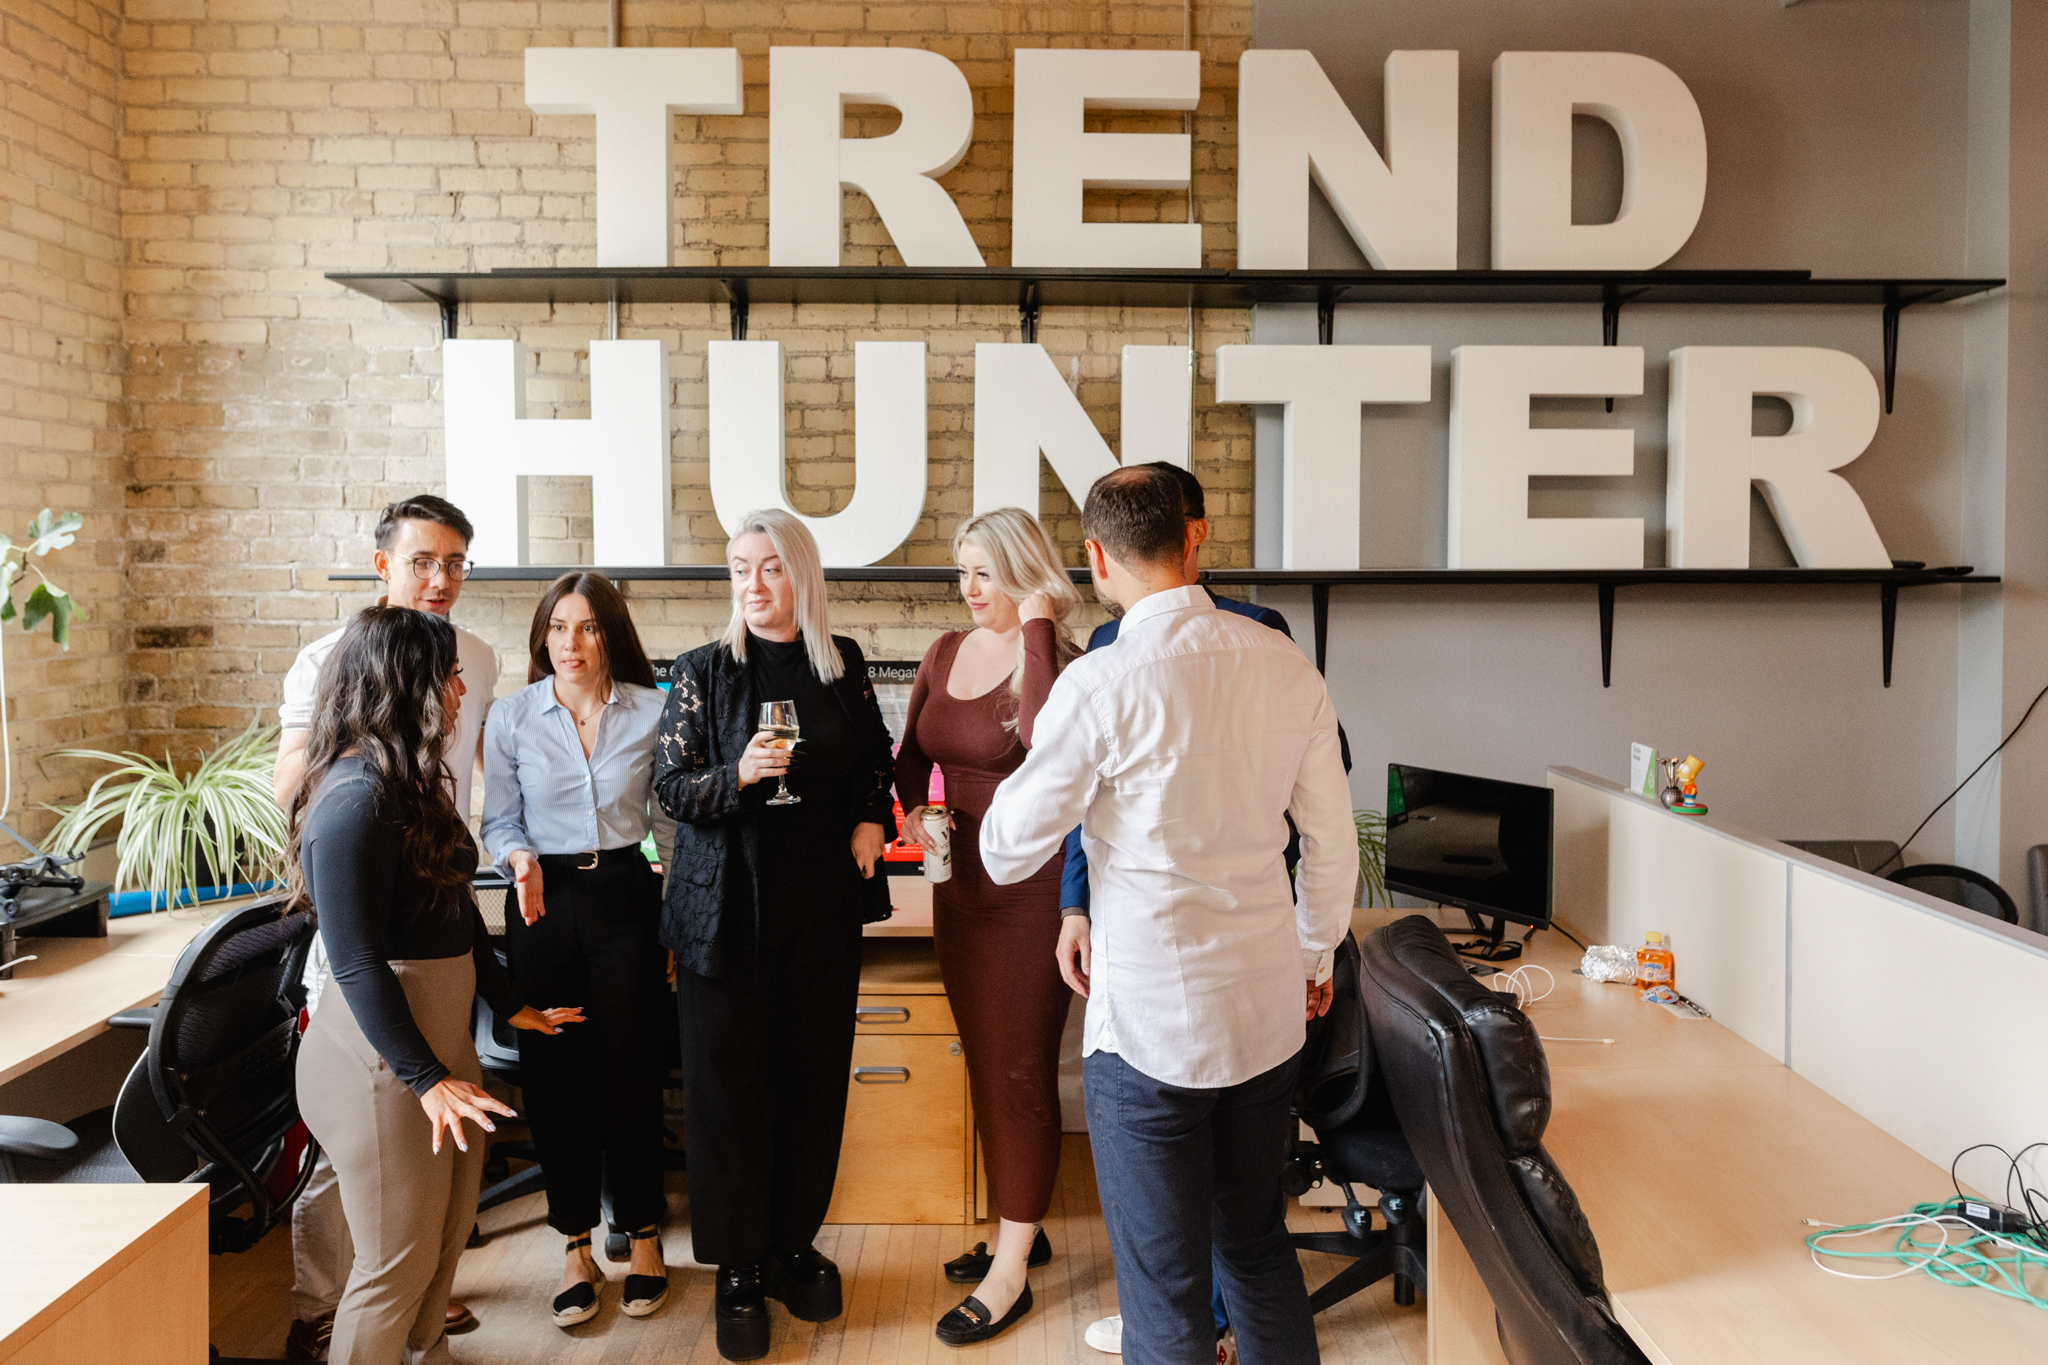 Event photography showcasing a group of people standing in front of a trend hunter sign.